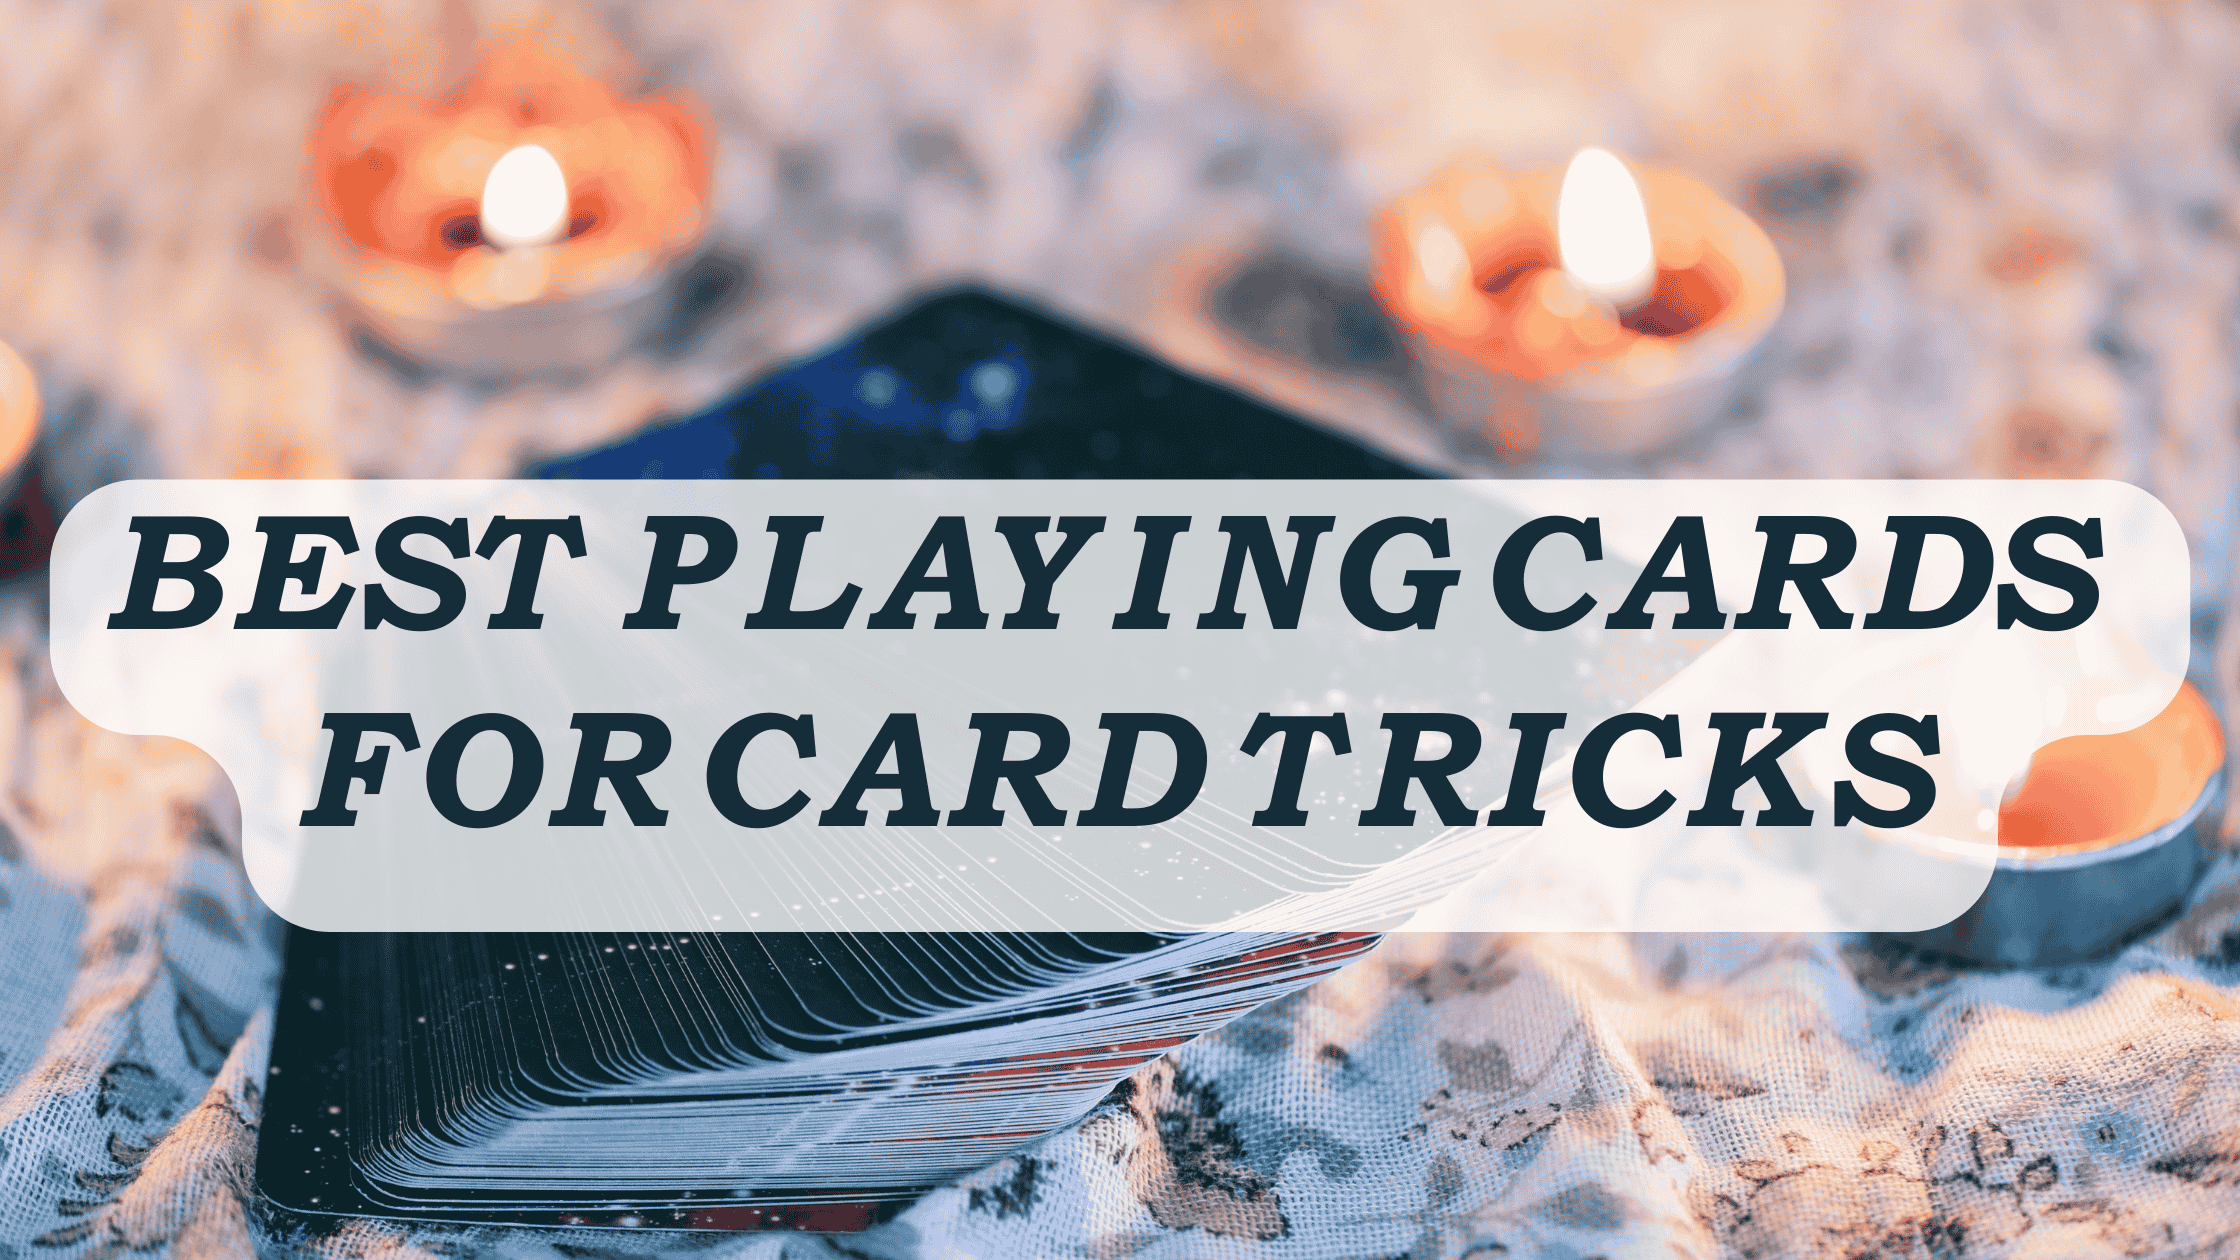 Best Playing Cards for Card Tricks